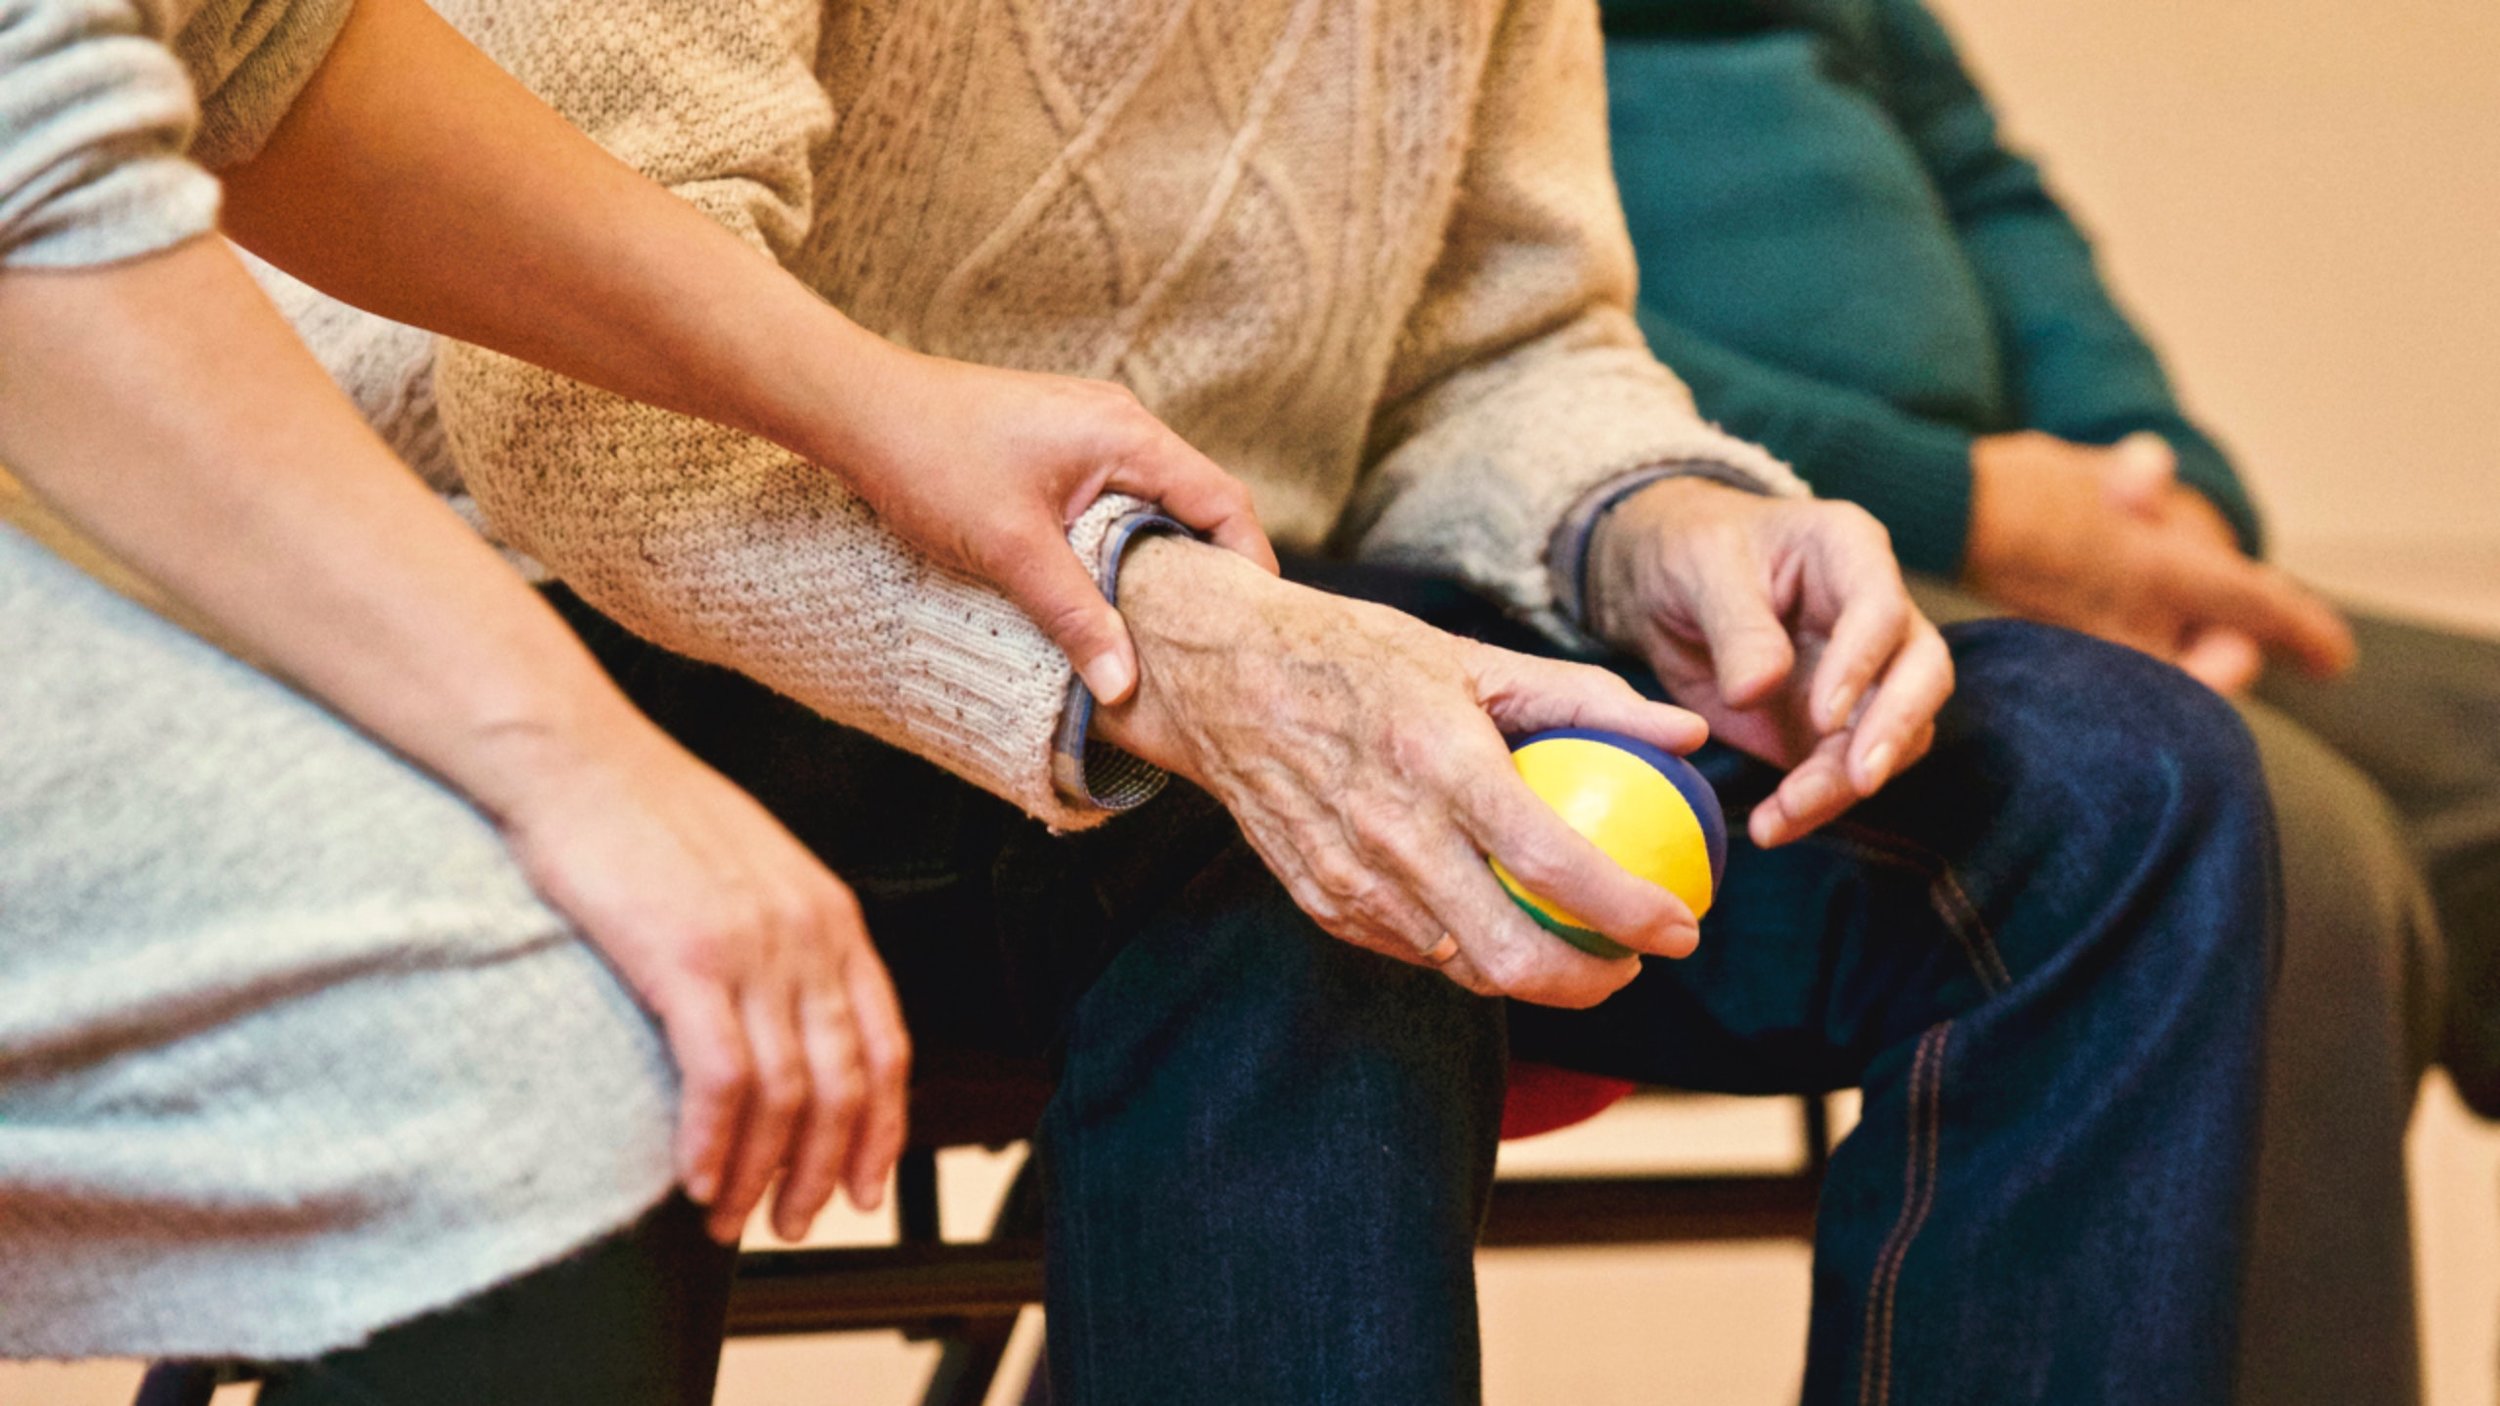 Elderly man holding a therapy ball, encouraged by a younger person’s hand